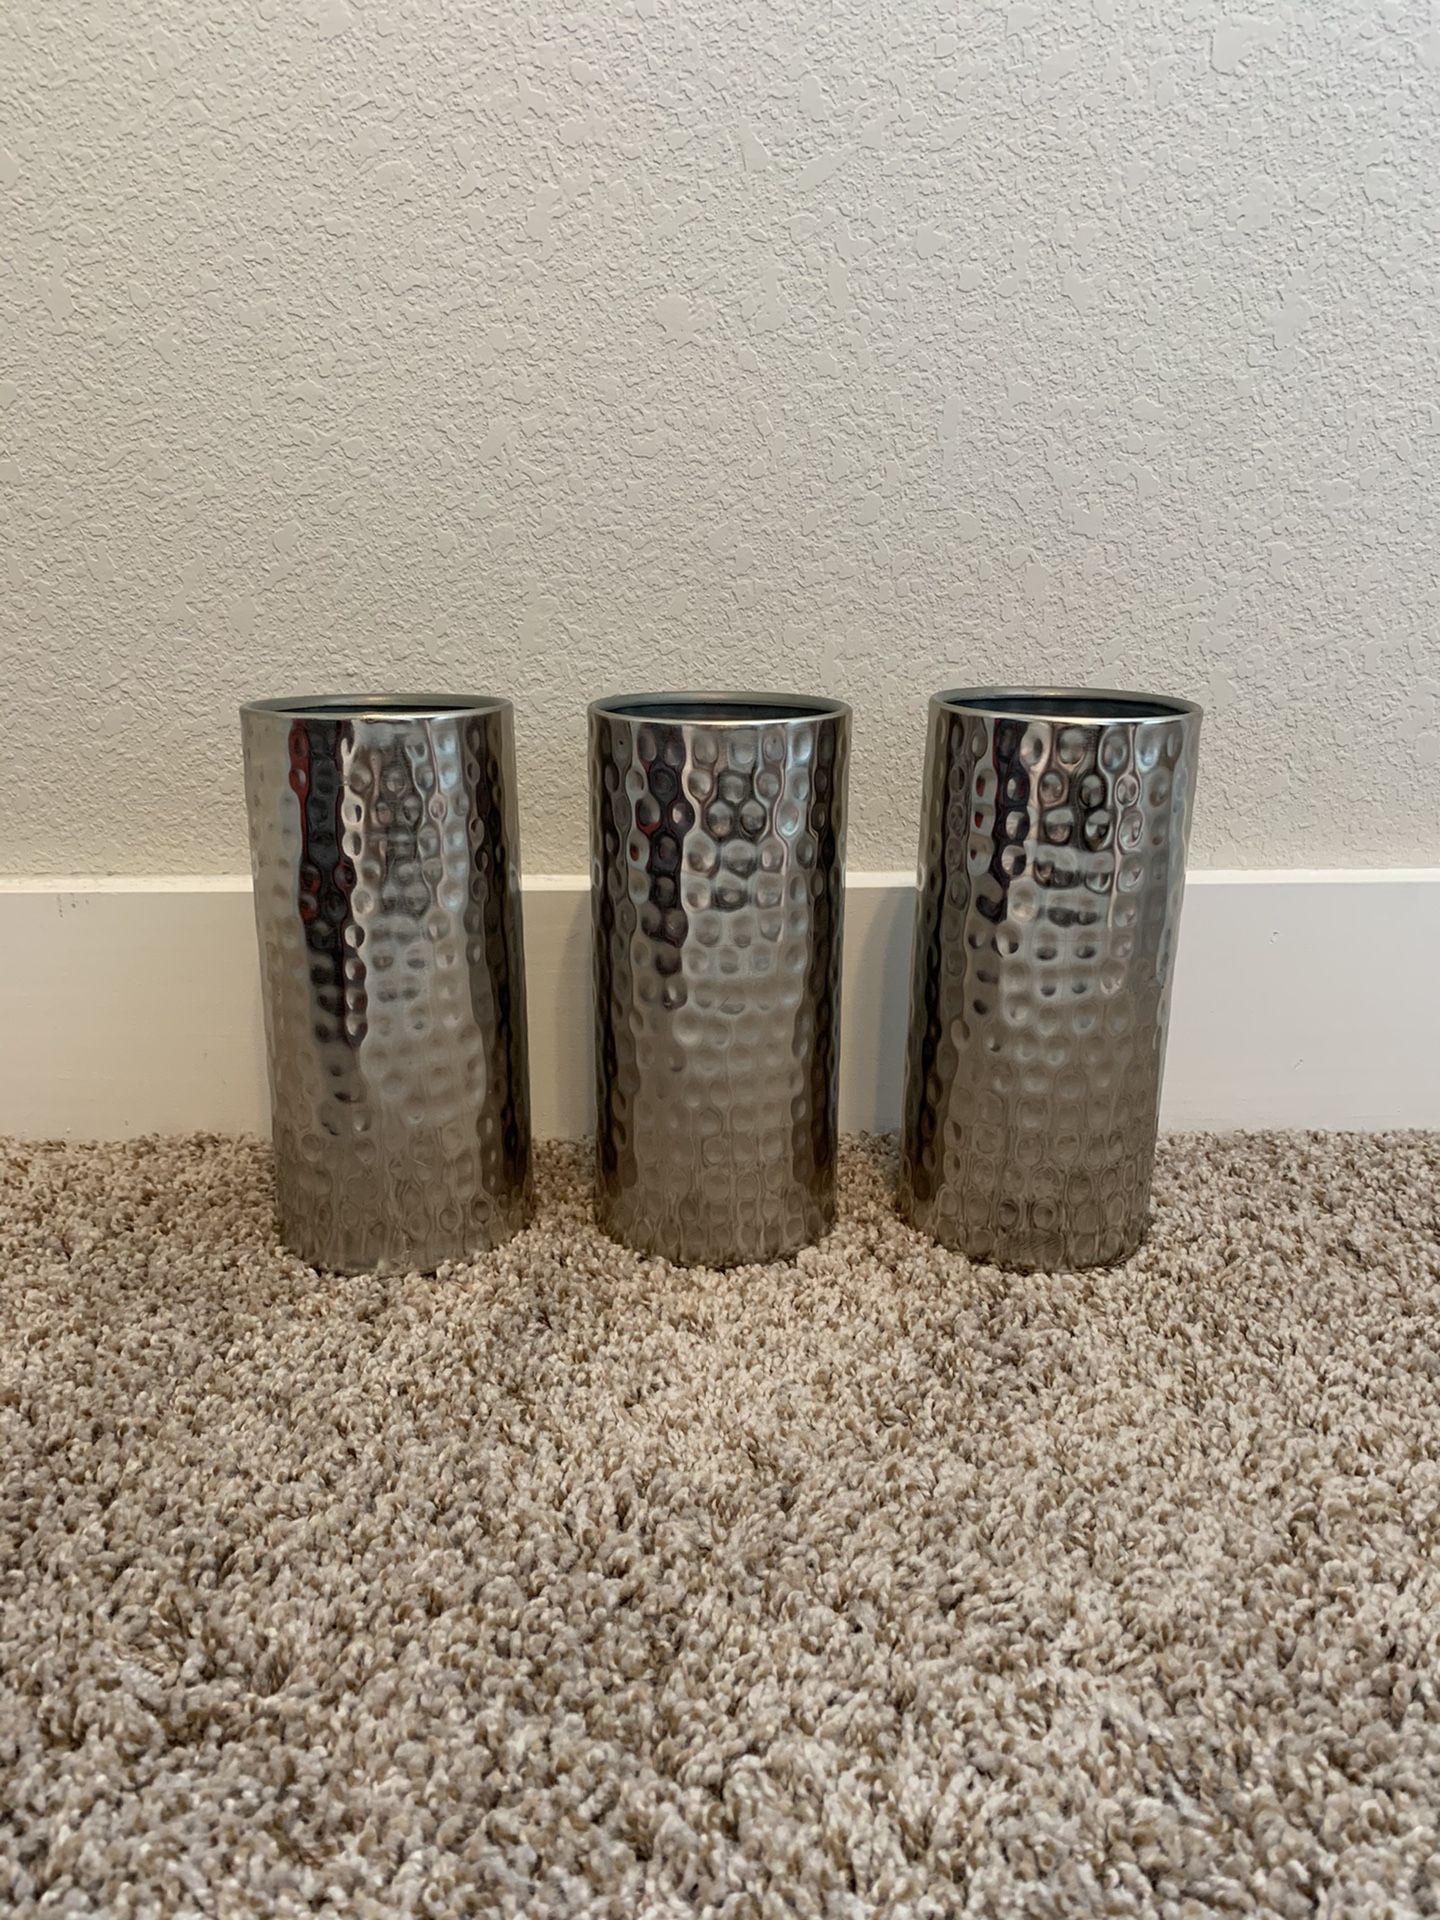 Three Stainless Steel Vases / Containers